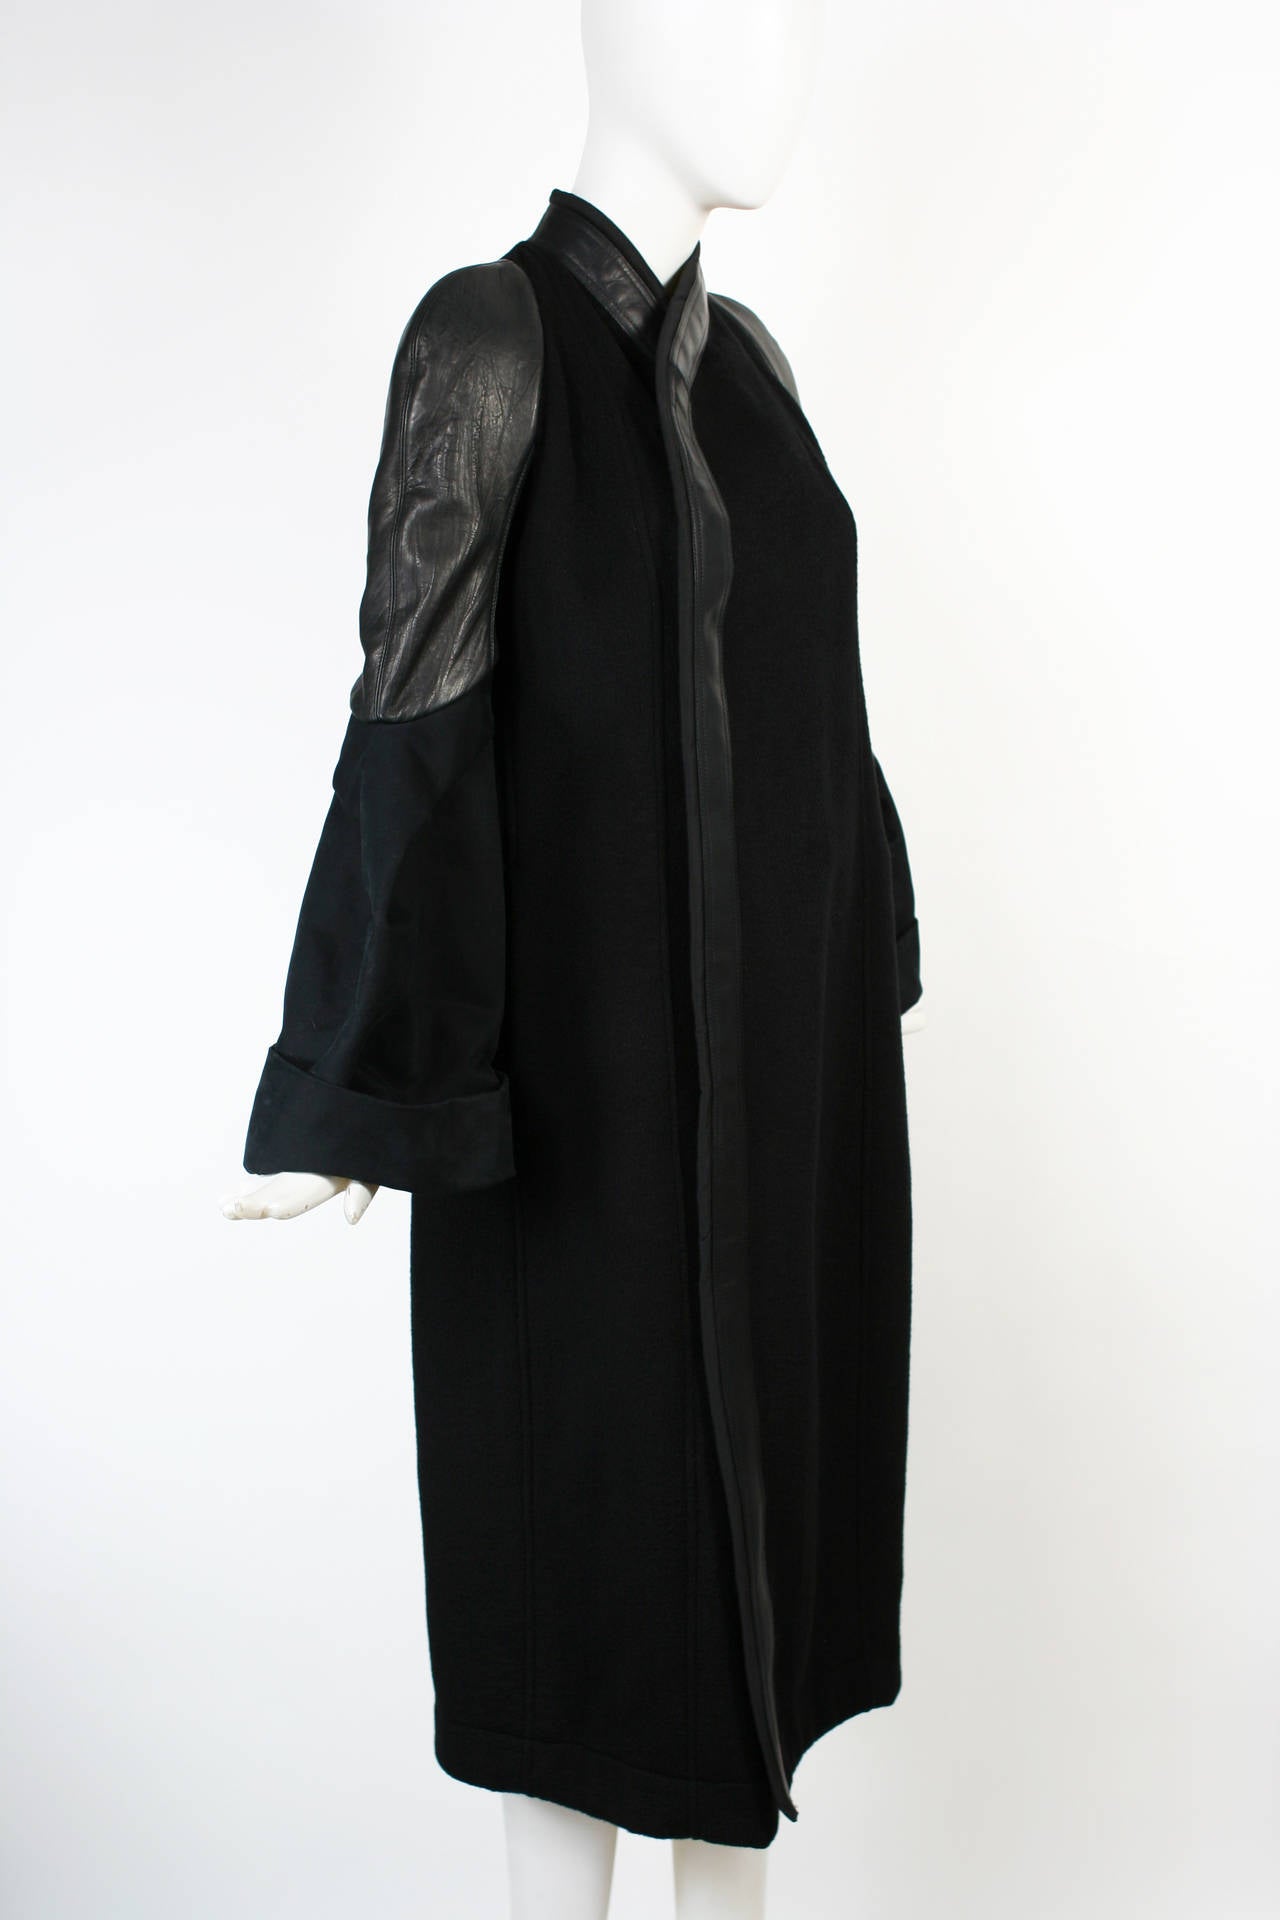 Magnificent Rick Owens Sculptural Black Cashmere and Leather Coat New With Tags In New Condition For Sale In New York, NY